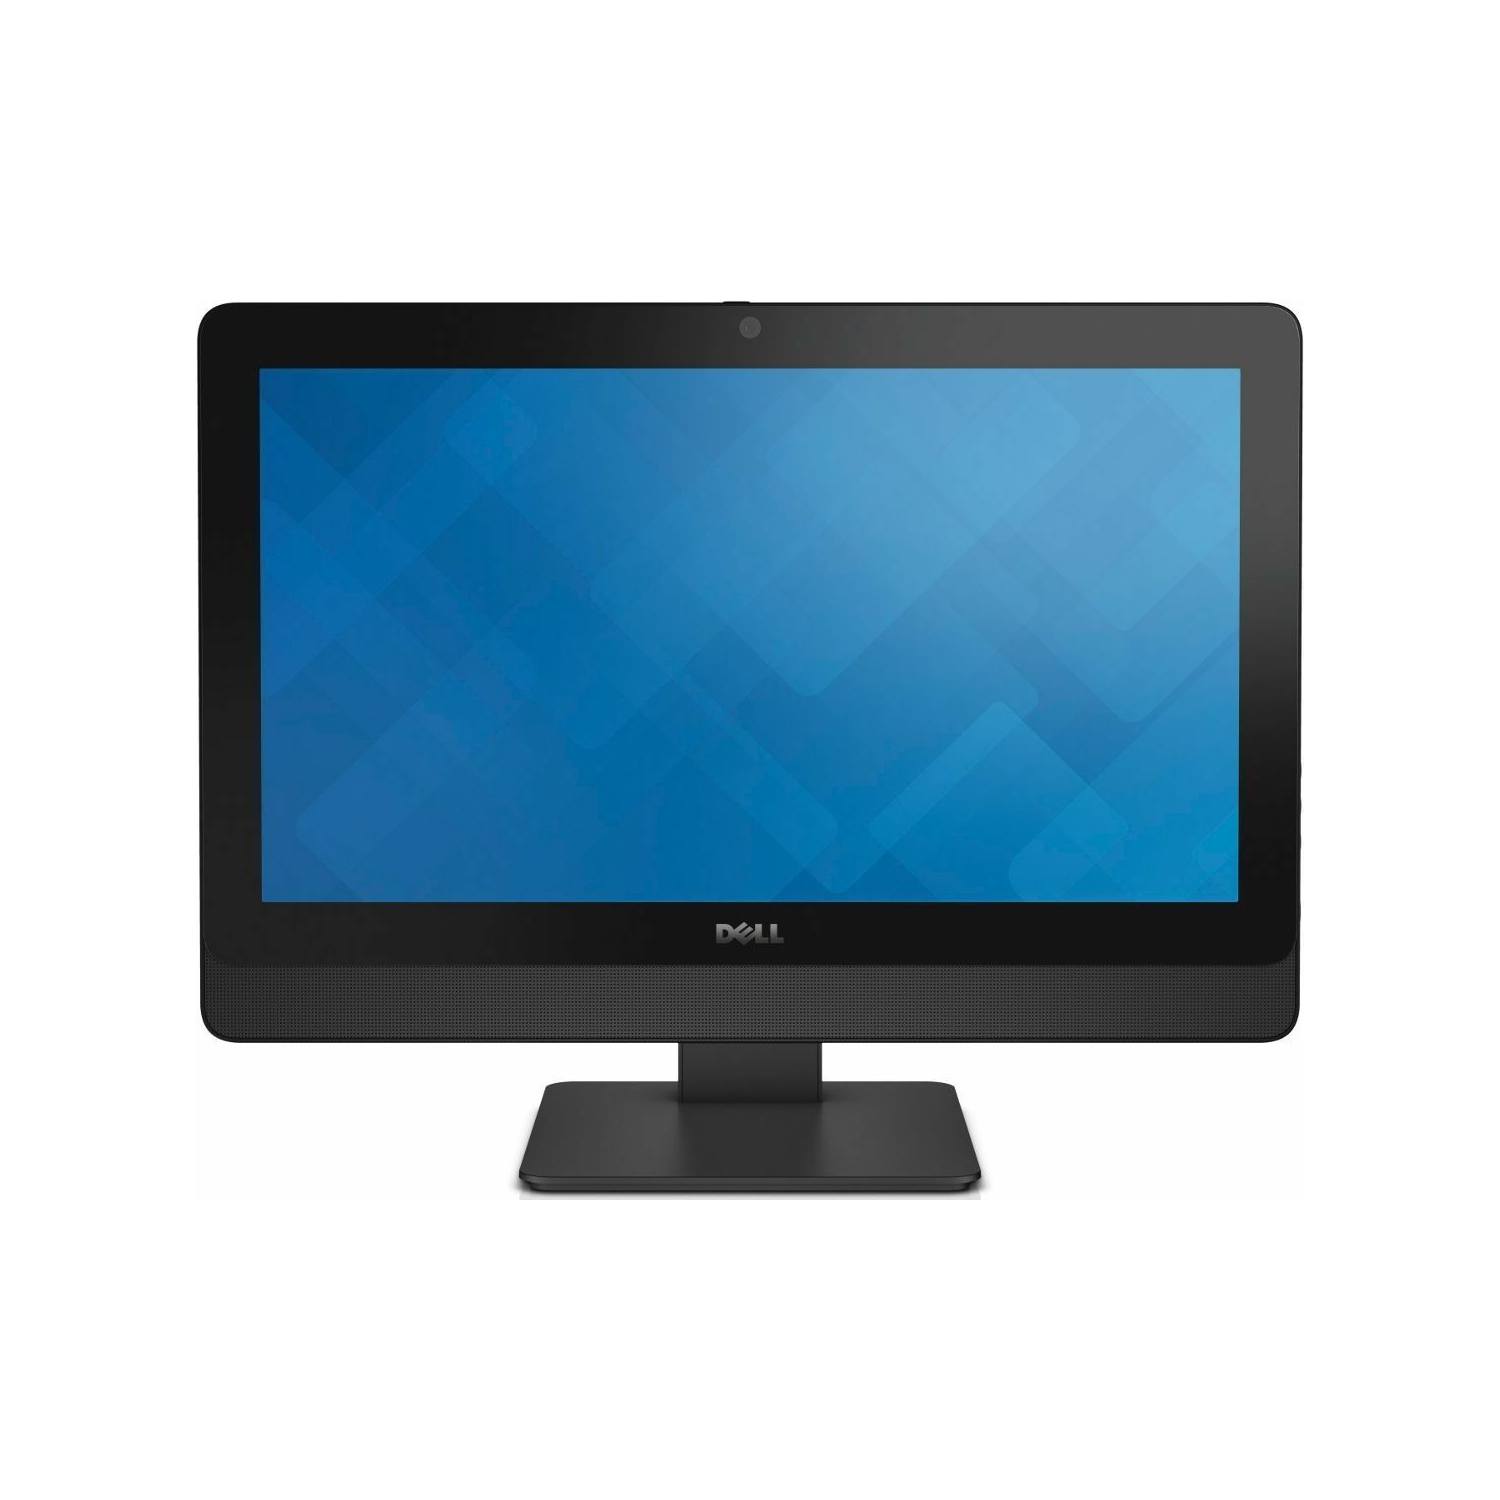 Refurbished (Good) - Dell 9030 AIO Desktop PC, i5 4590S 3.0GHz, 8GB, 256SSD, DVD-ROM, Windows 10 Home, USB WIFI, TouchScreen, USB Keyboard & Mouse, 90 Day Warranty, Grade A